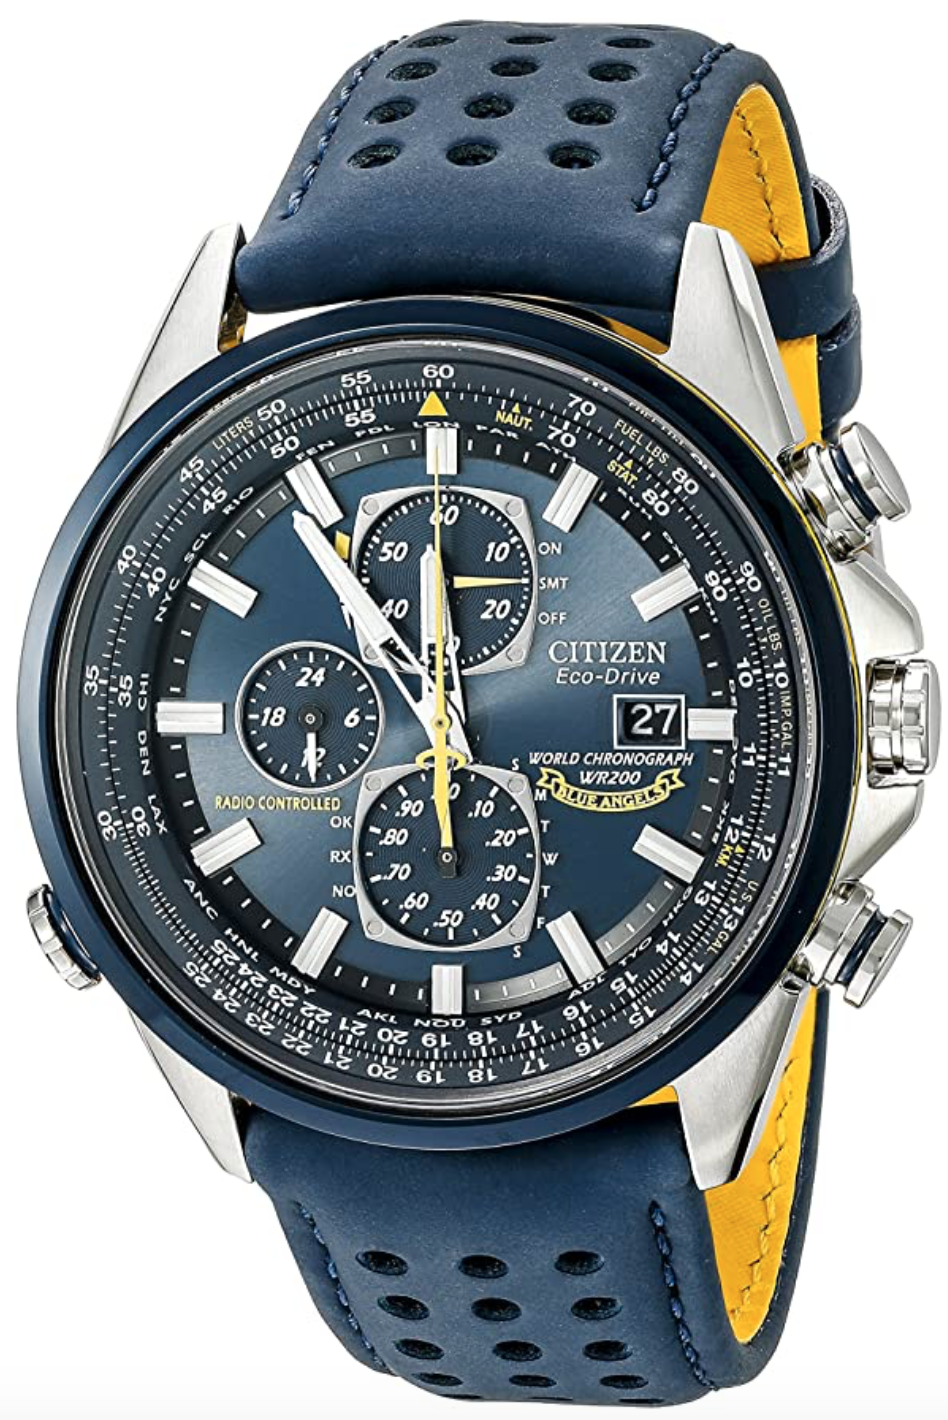 Citizen Men's Eco-Drive Blue Angels World Chronograph Atomic Timekeeping Watch with Day/Date, AT8020-03L